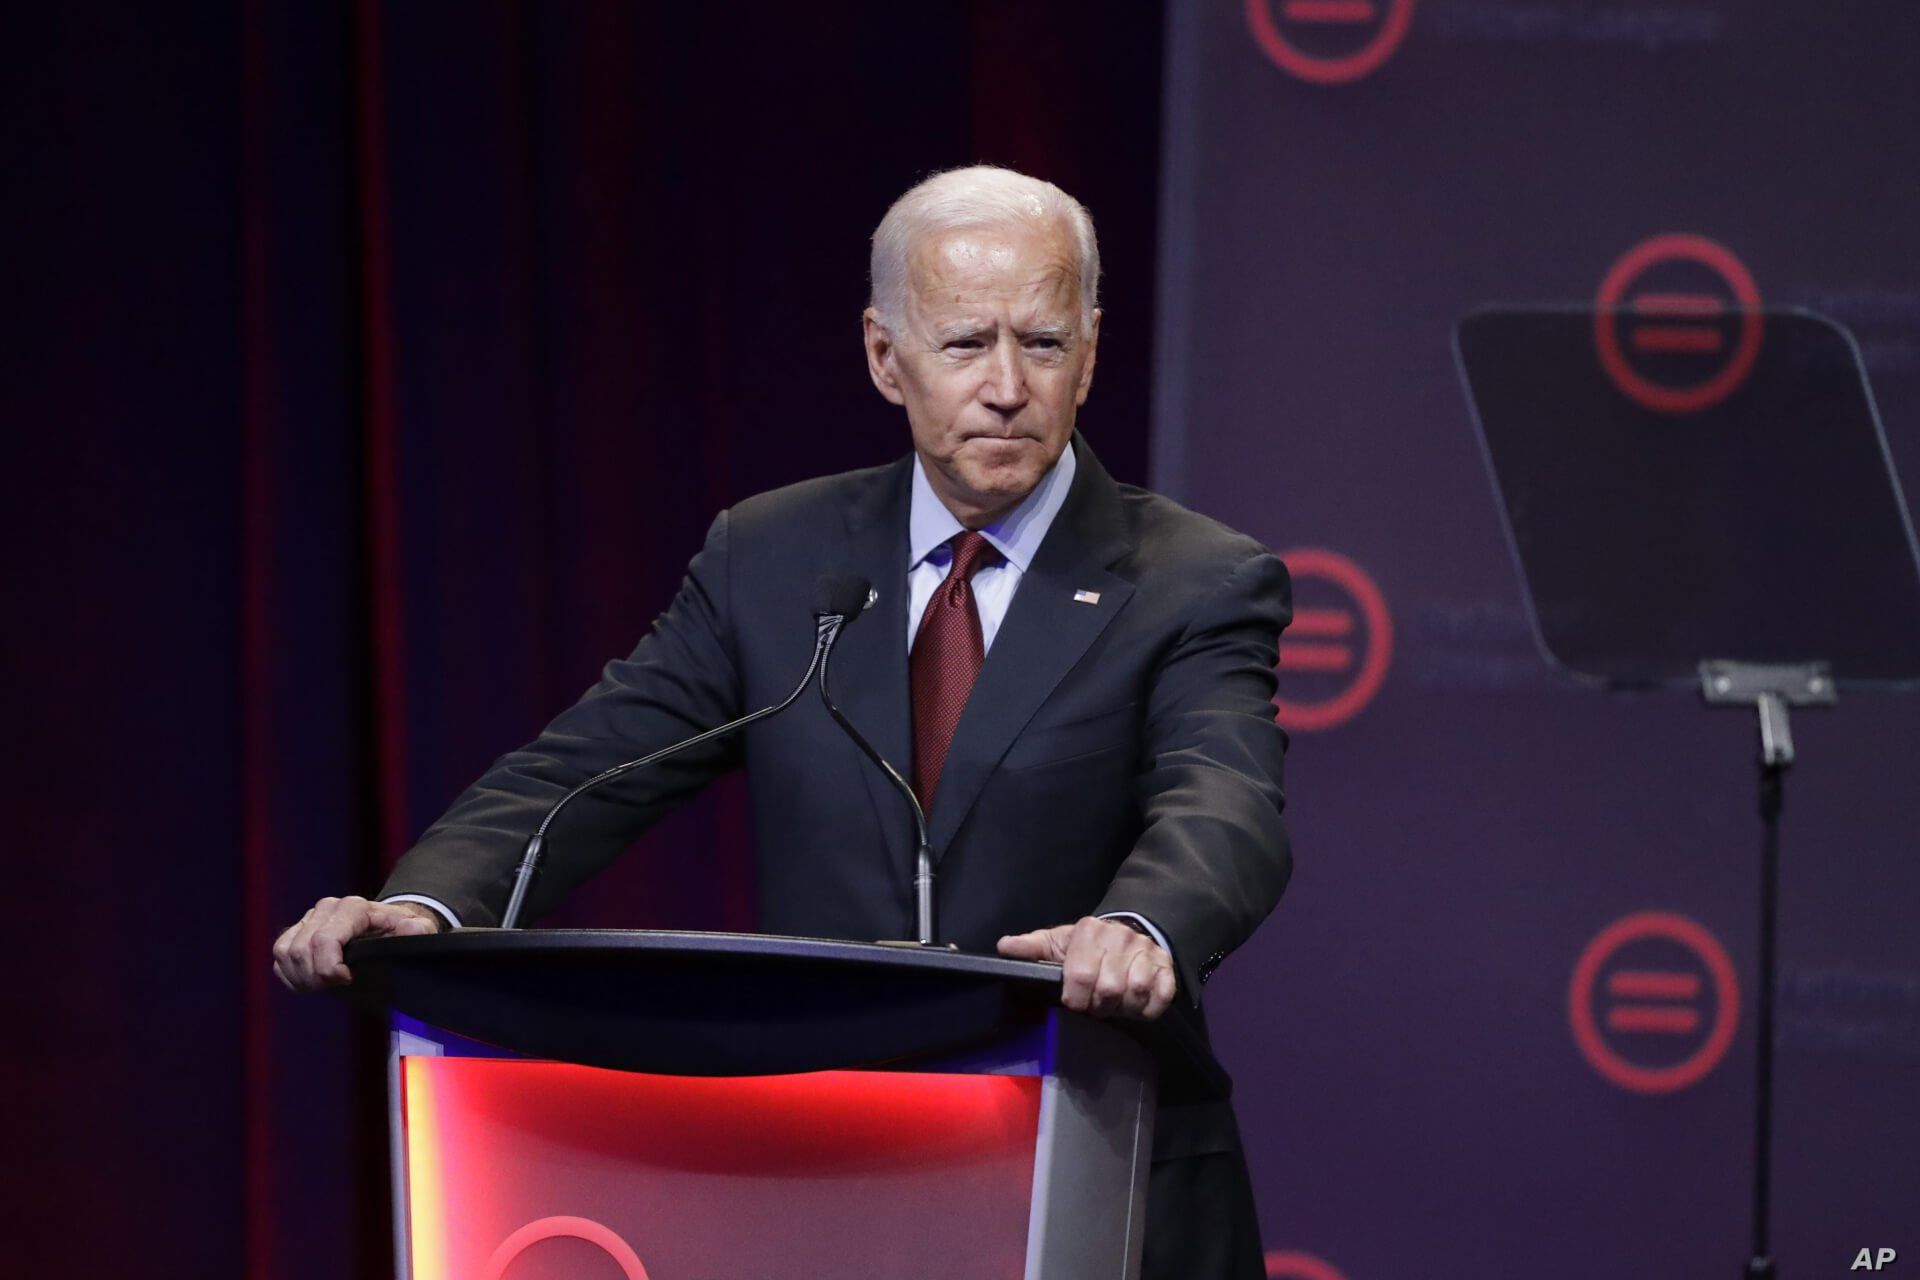 Democratic presidential candidate former Vice President Joe Biden, speaks during the National Urban League Conference, Thursday, July 25, 2019, in Indianapolis. (AP Photo/Darron Cummings)